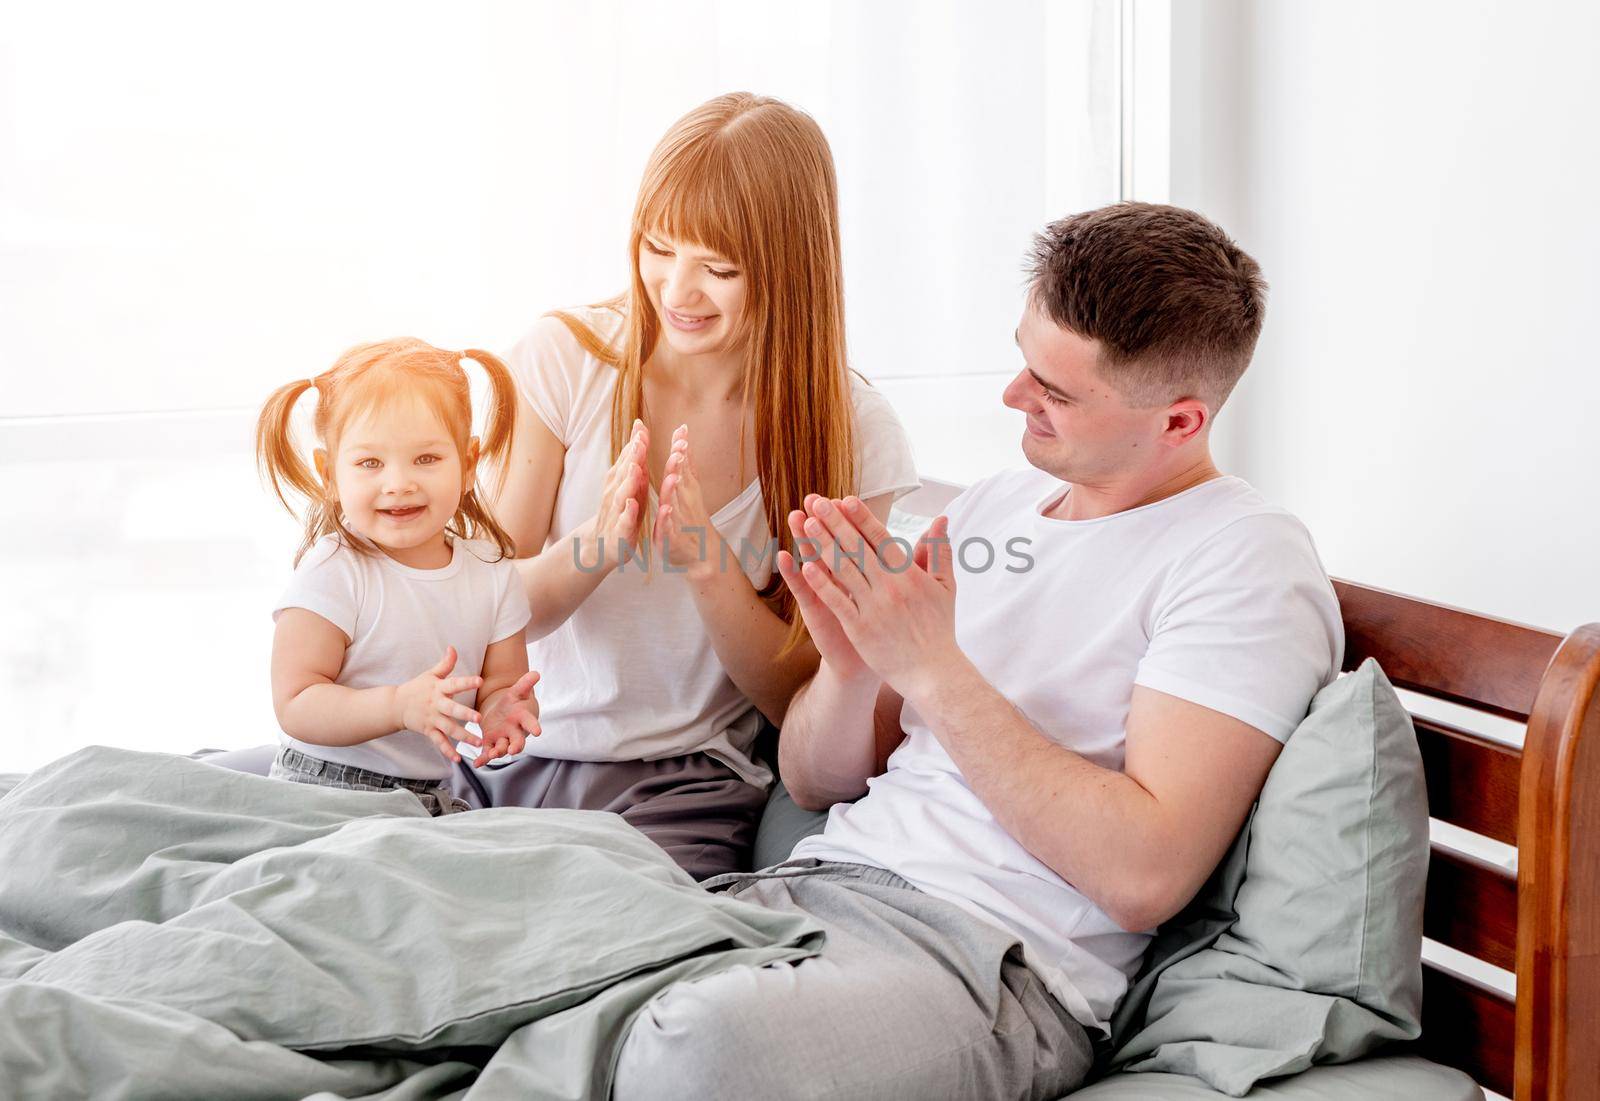 Sunny family morning in the bedroom. Beautiful parents with their daughter staying in the bed and resting. Mother, father and child wearing pajamas smiling